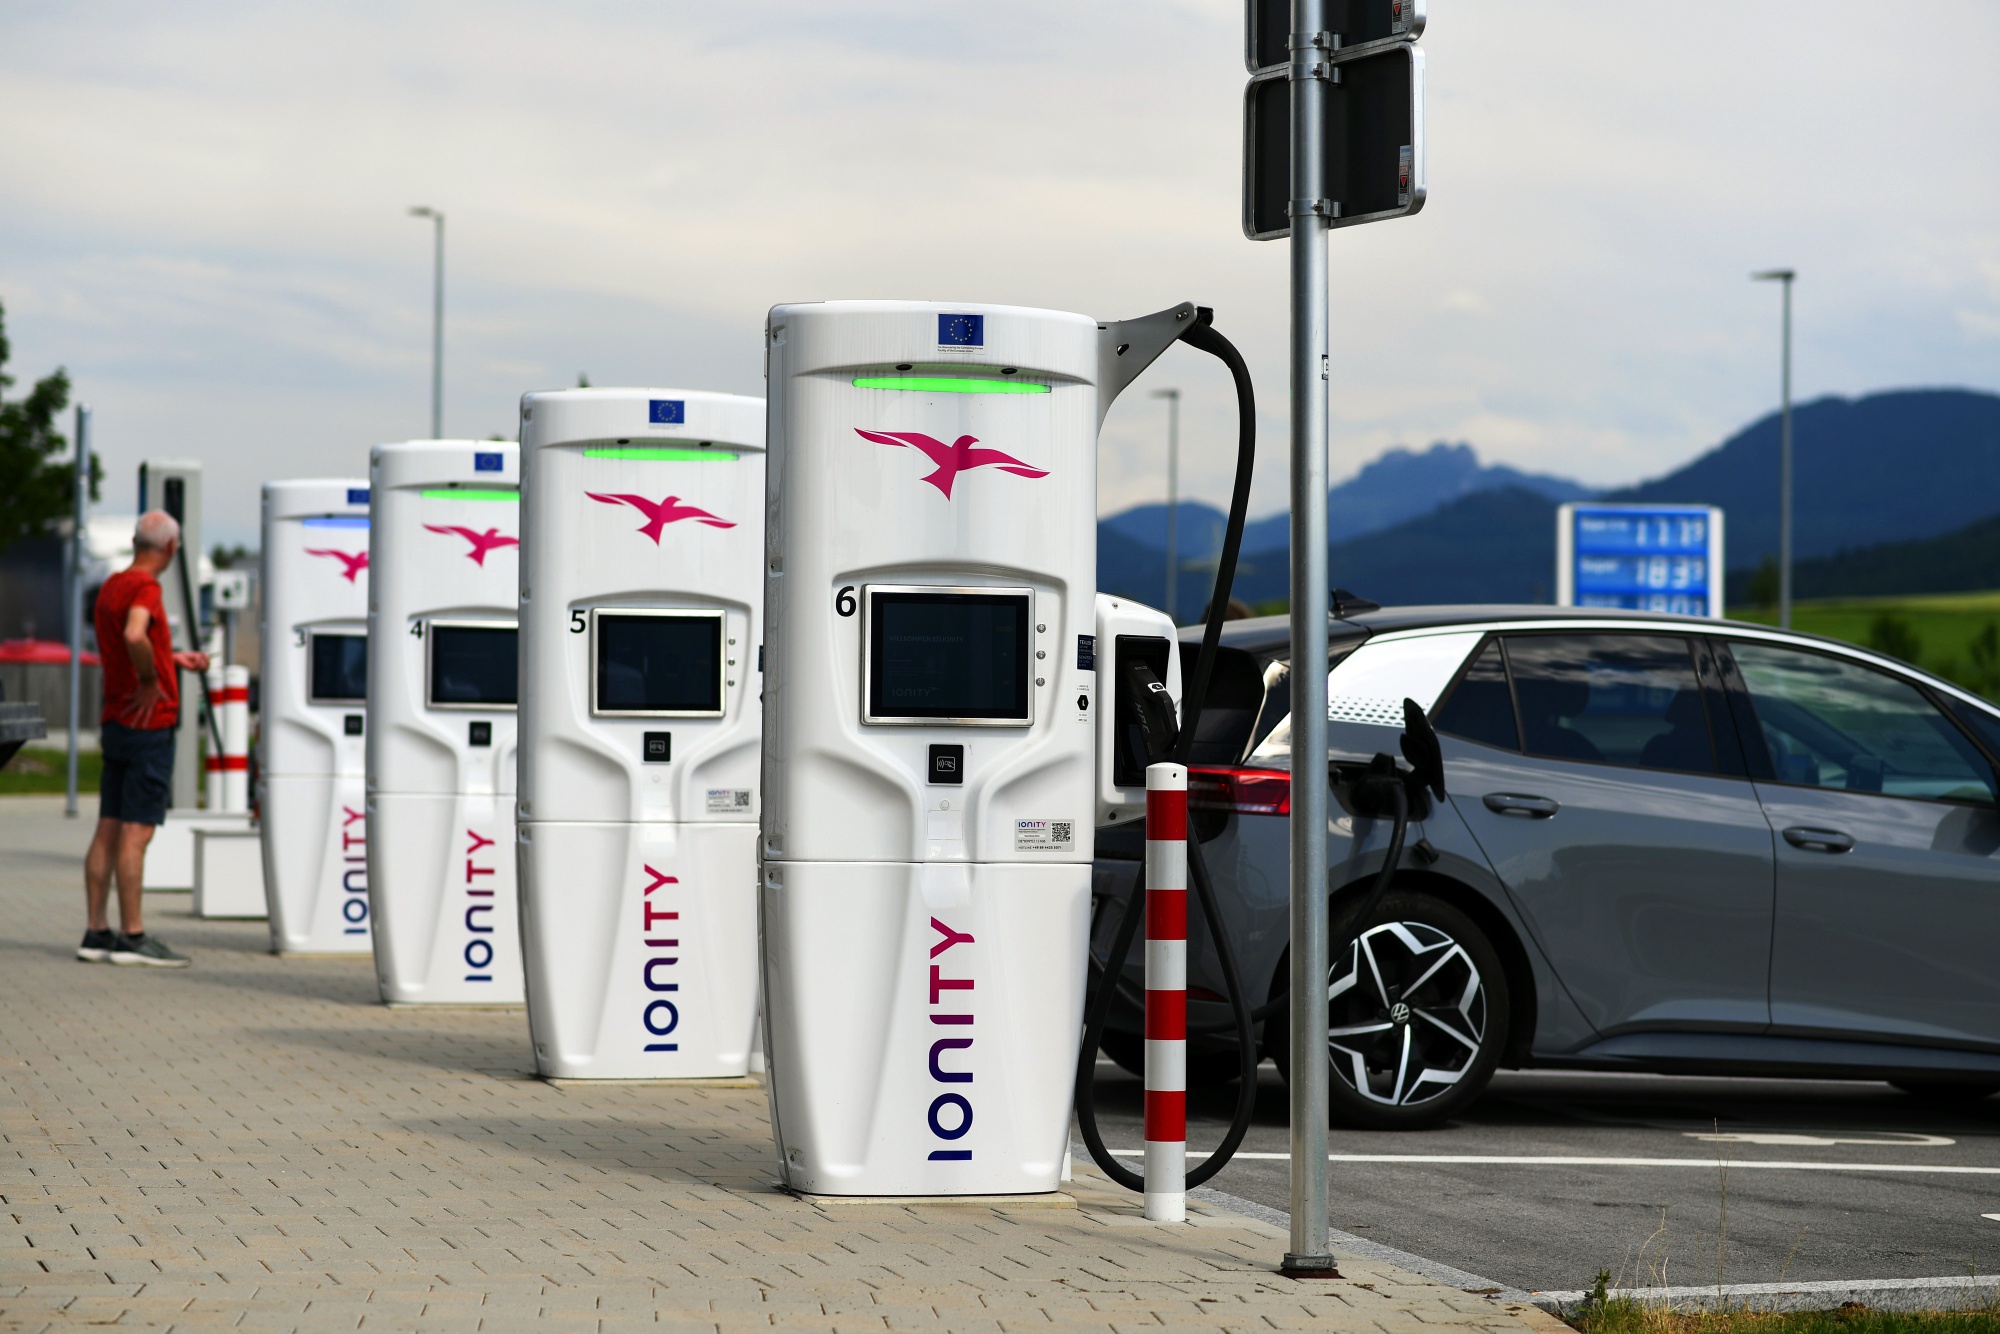 Europe Will Need 65 Million Electric Vehicle Chargers by 2035